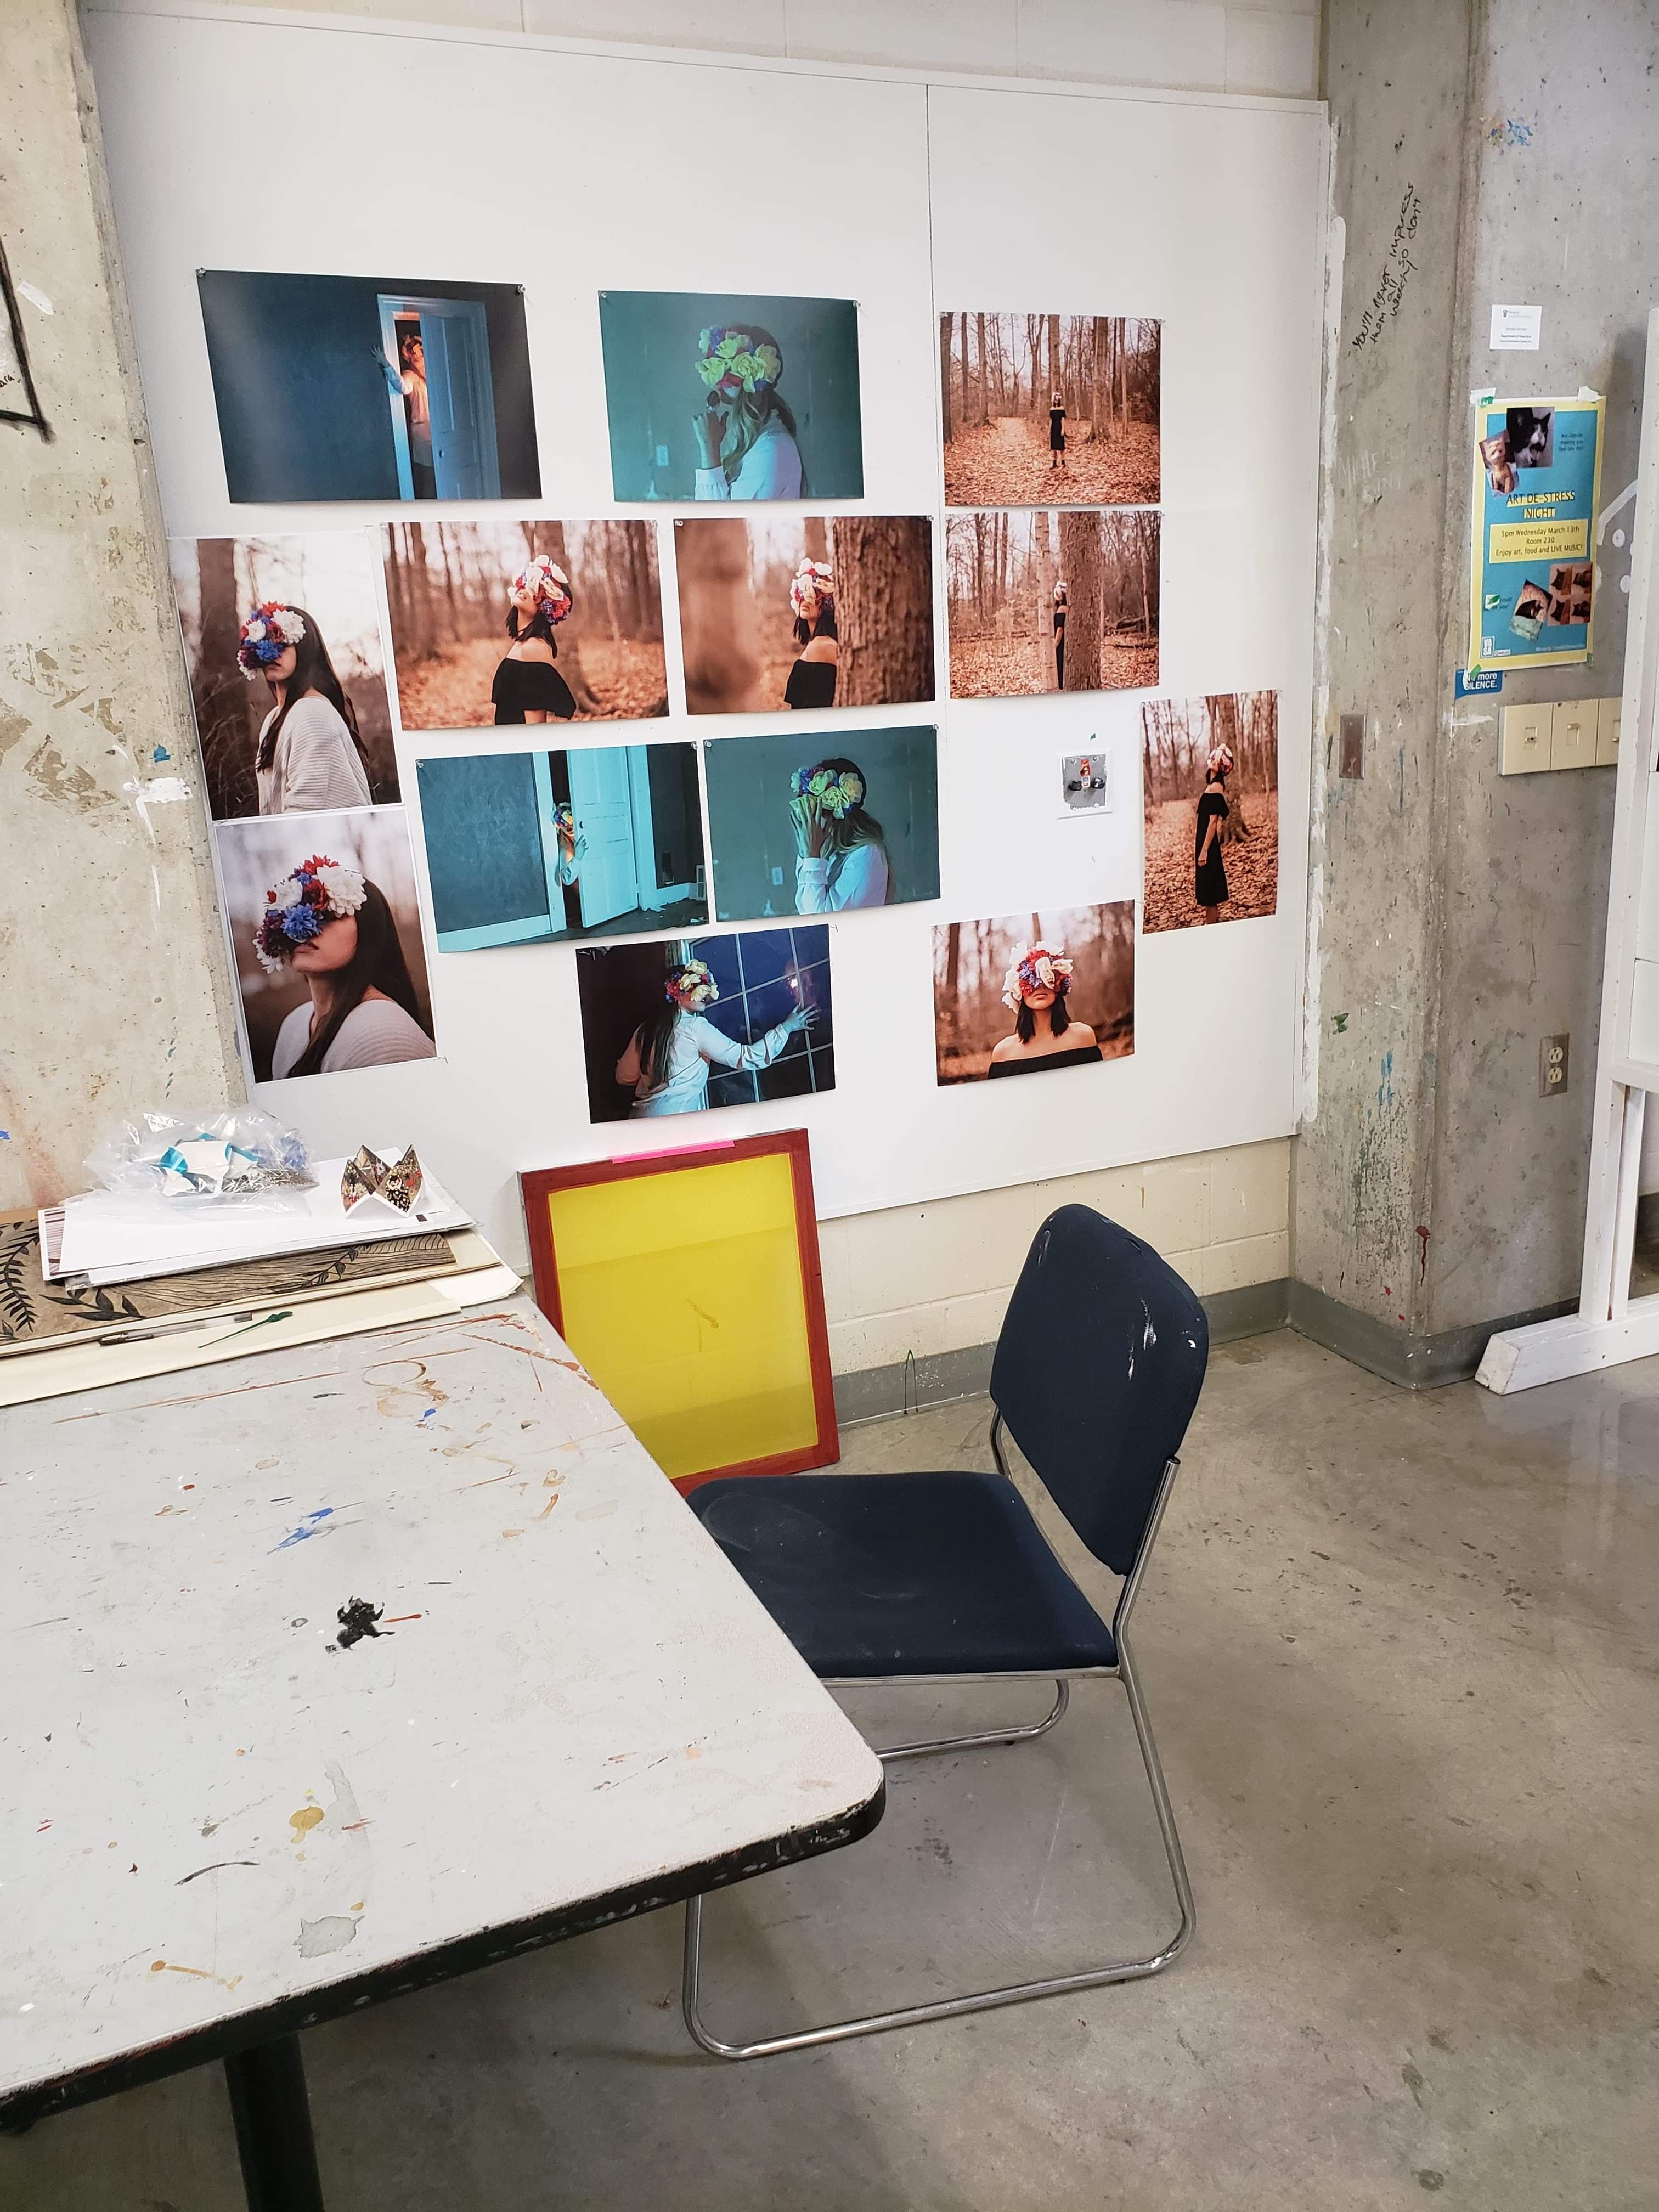 Photo of a studio with photo prints pinned to a board for review.